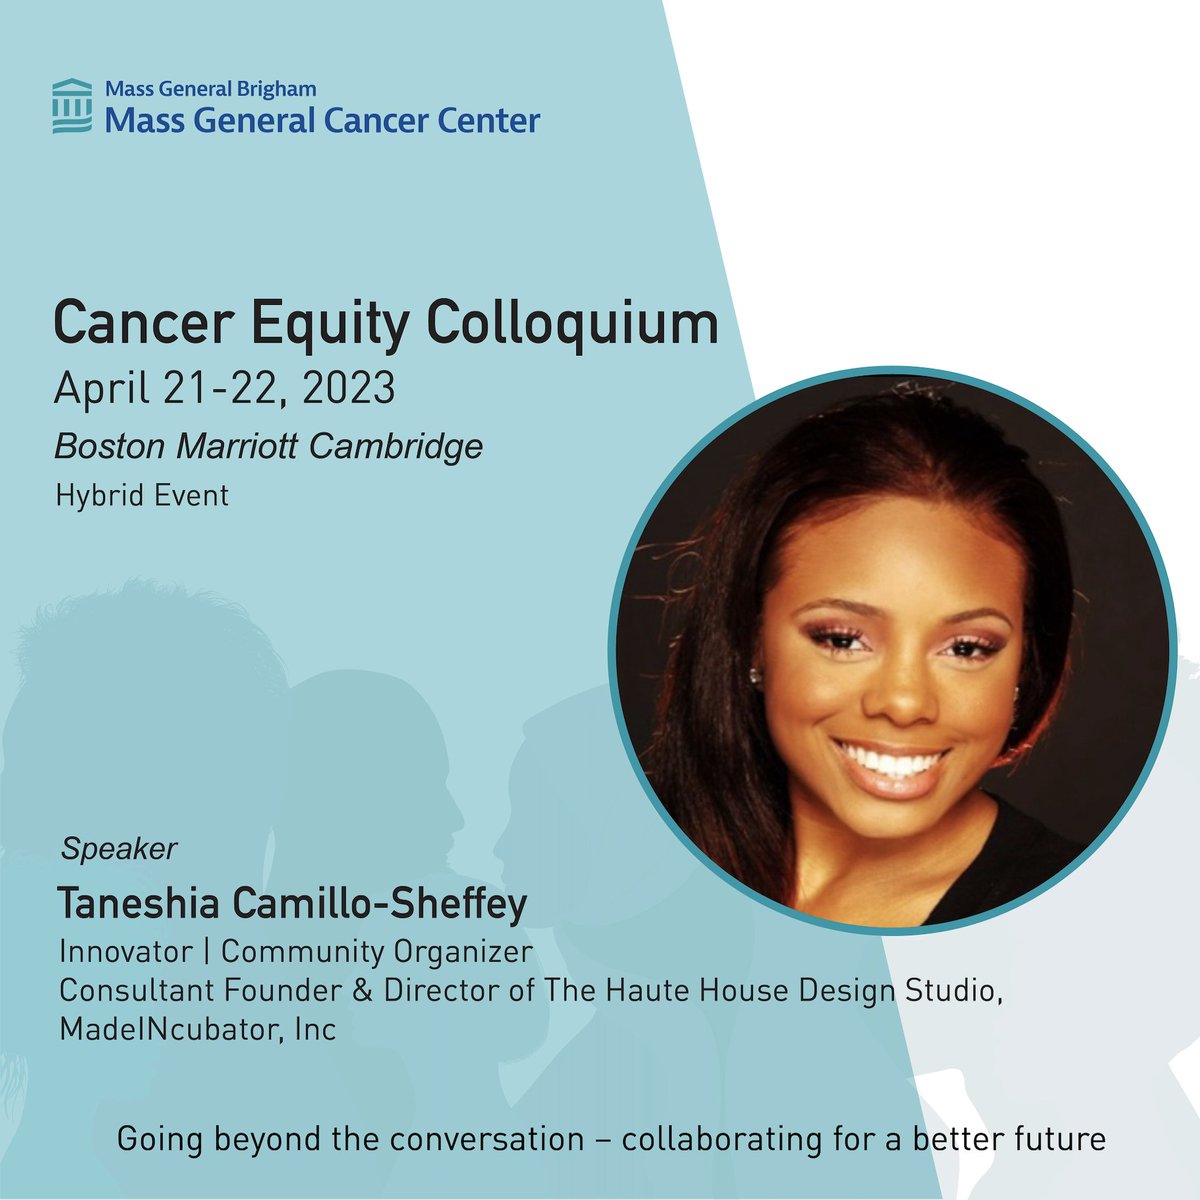 Are you joining the #CancerEquityColloquium this week (bit.ly/3HRpOcL)? Don't miss powerful and inspiring panels like this one 👉 'The Compounding Effects of Cancer: 'My Voice, My Story, My Truth.' @mavidormike @stanrameau @MadeINcubator @MassGenBrigham @MassGenBrighCPD